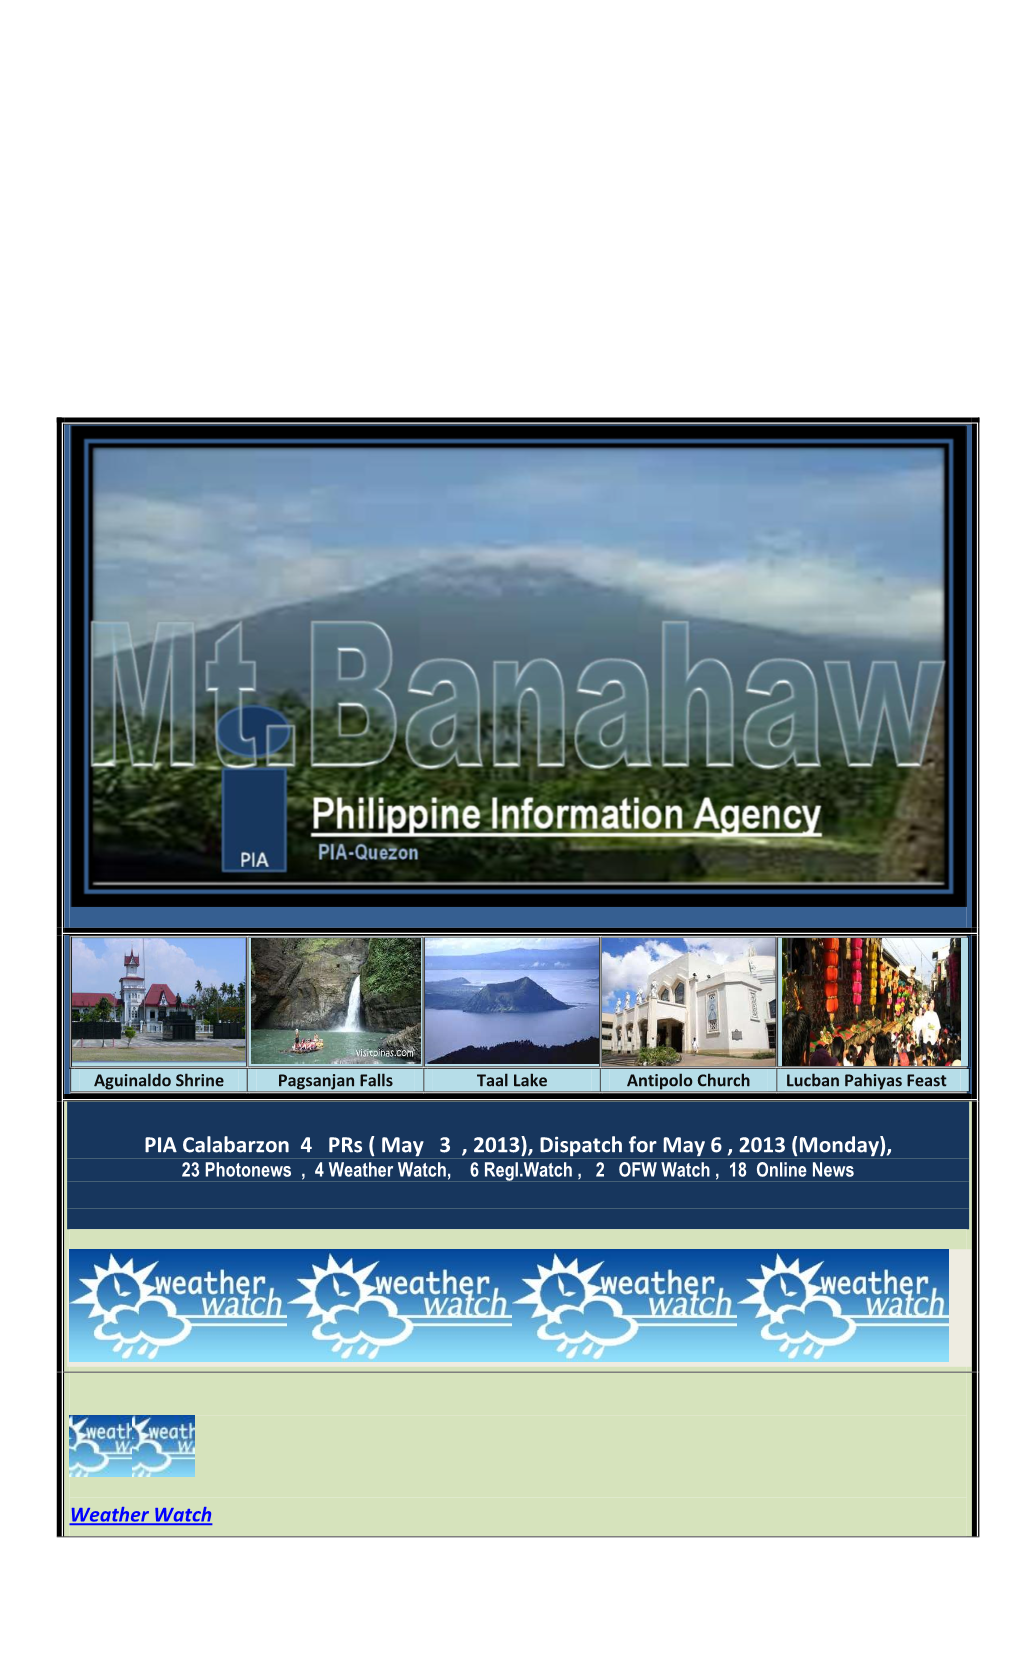 May 3 , 2013), Dispatch for May 6 , 2013 (Monday), 23 Photonews , 4 Weather Watch, 6 Regl.Watch , 2 OFW Watch , 18 Online News